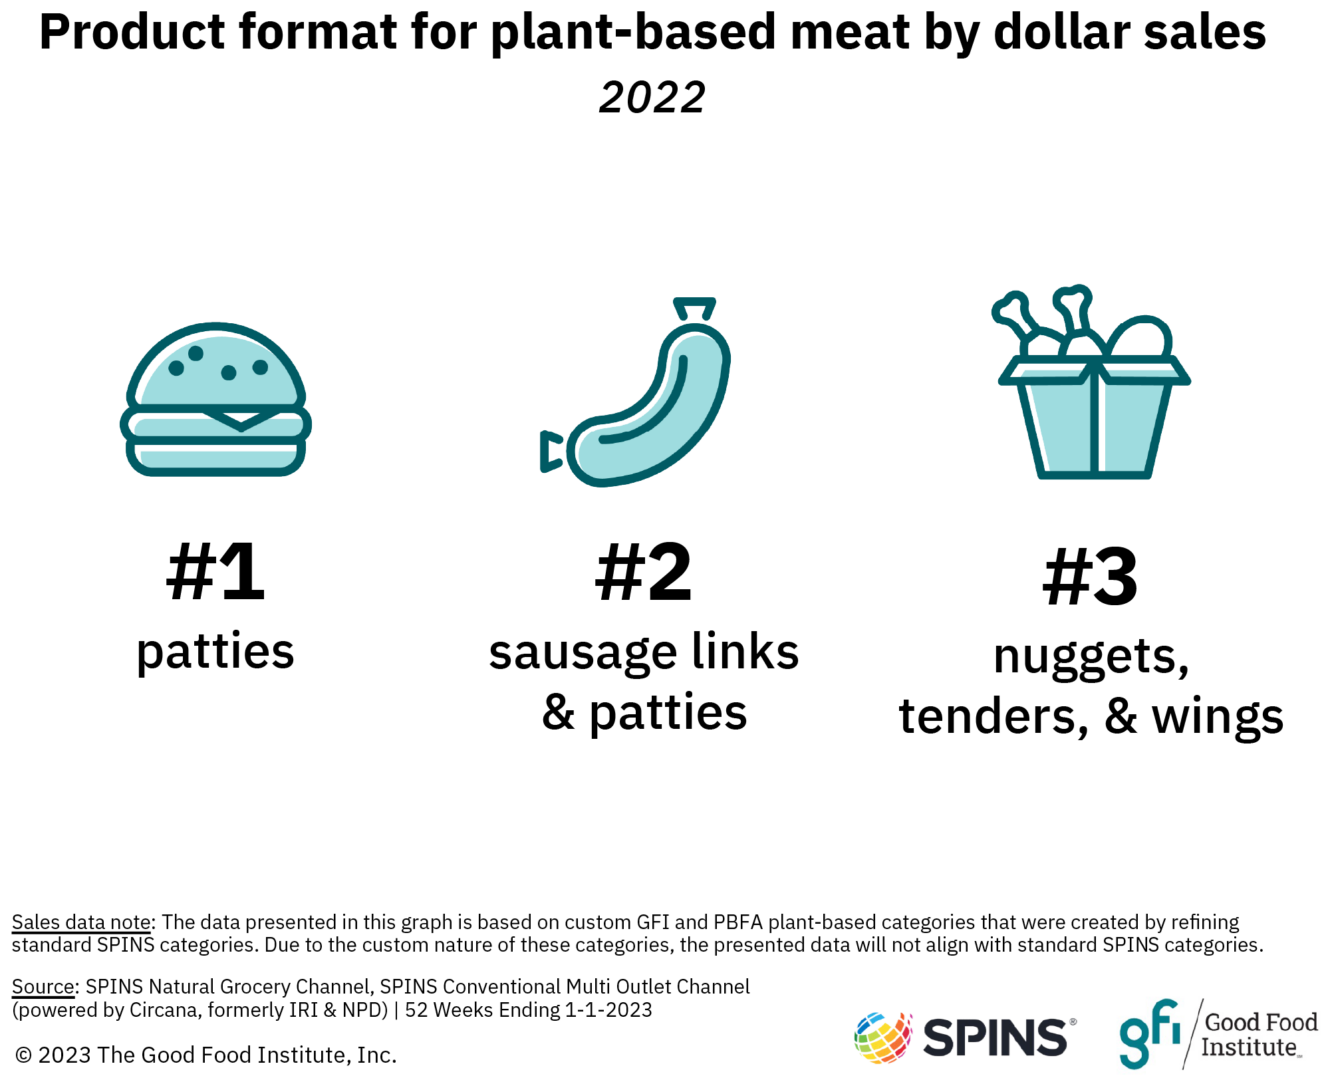 Top 3 plant-based meat formats